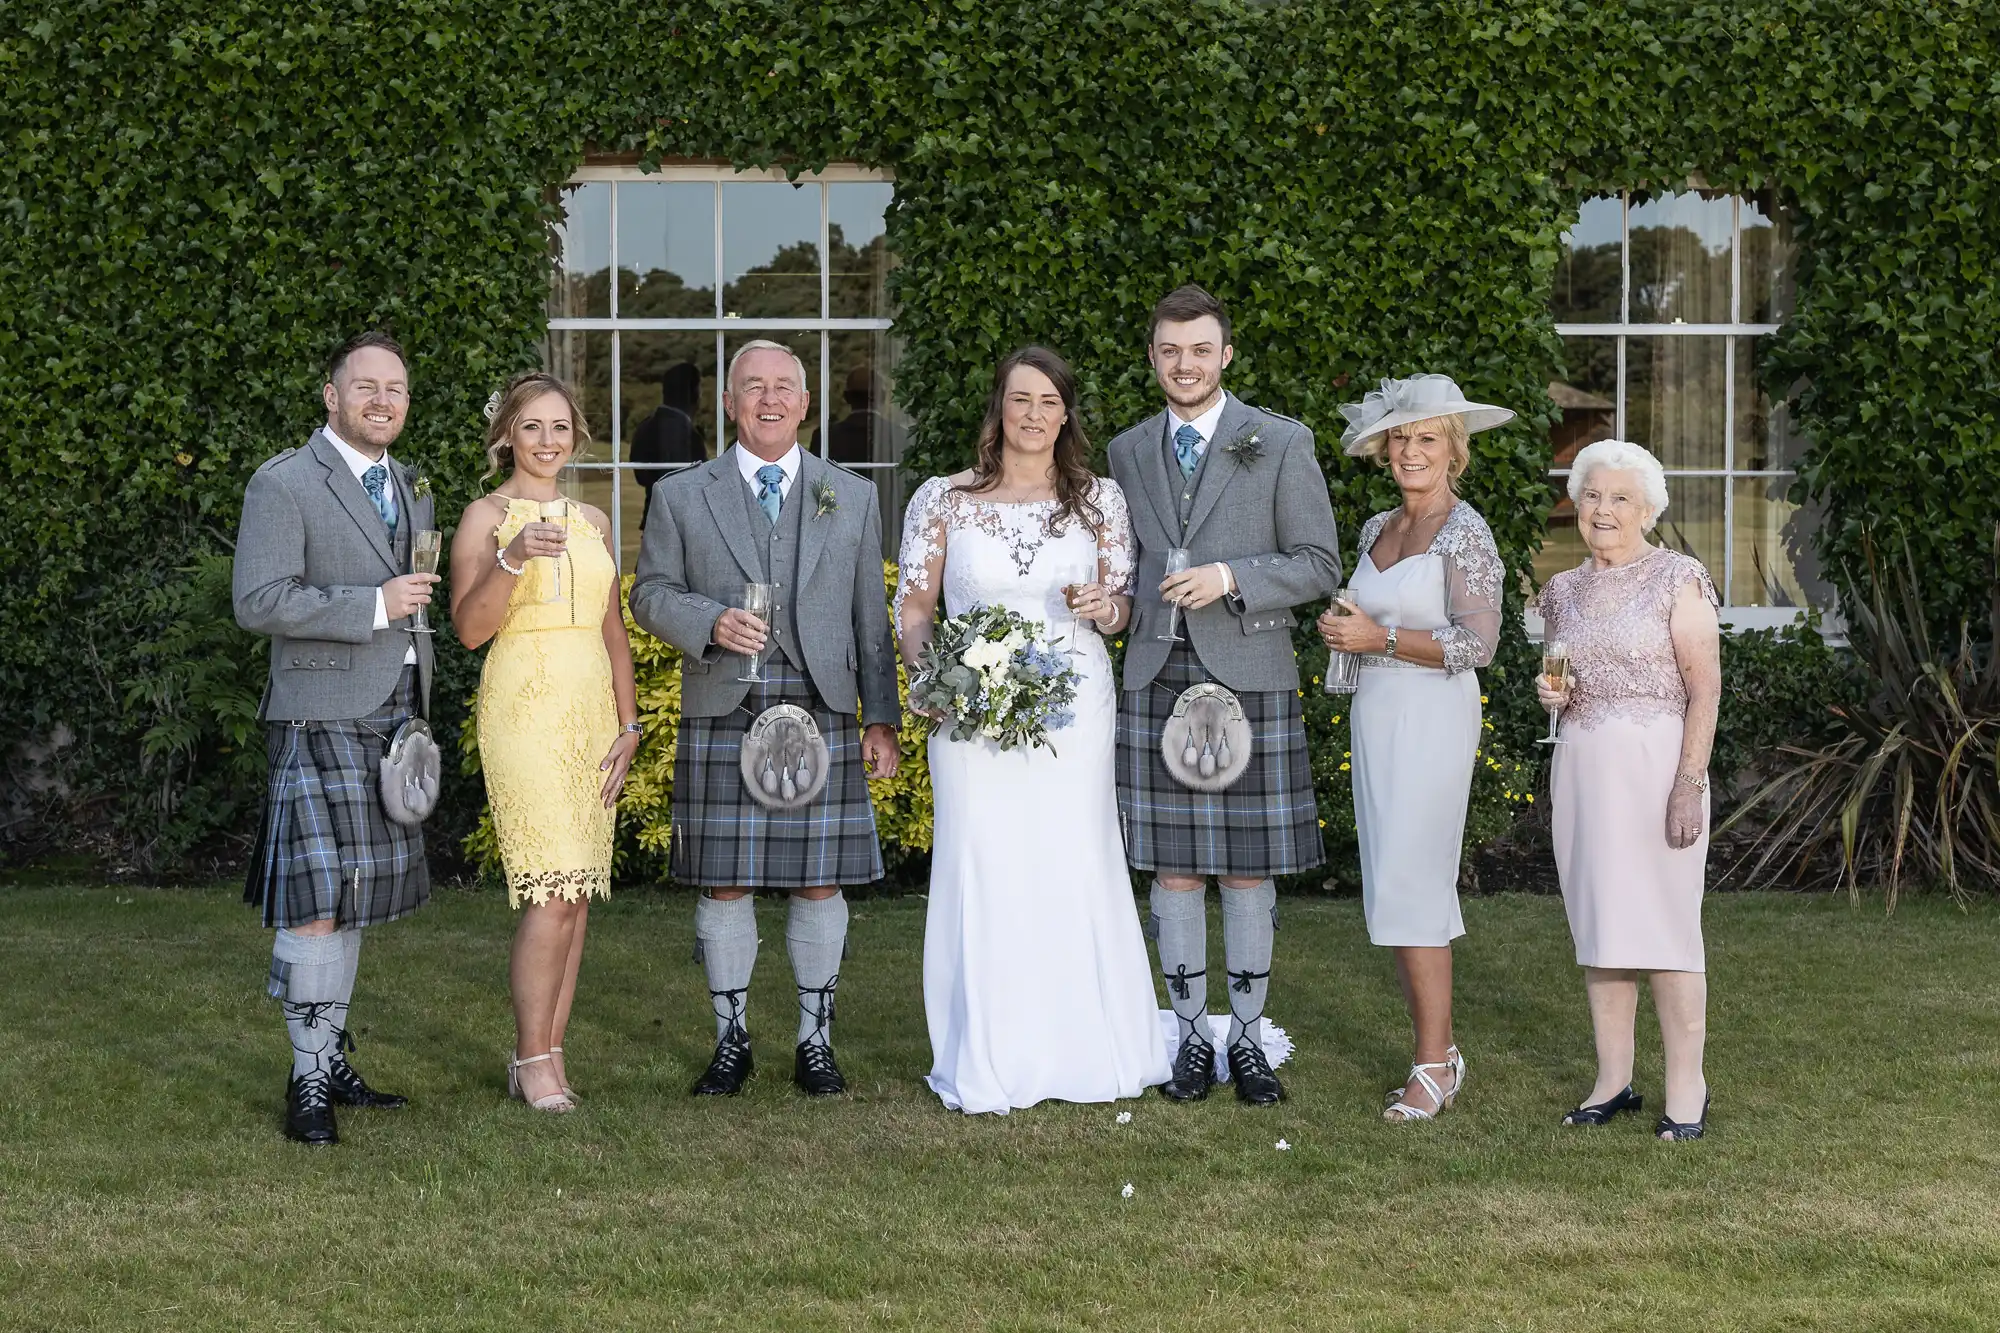 A family dressed in formal attire with kilts poses for a photo at a wedding, holding champagne glasses, in front of a hedge.